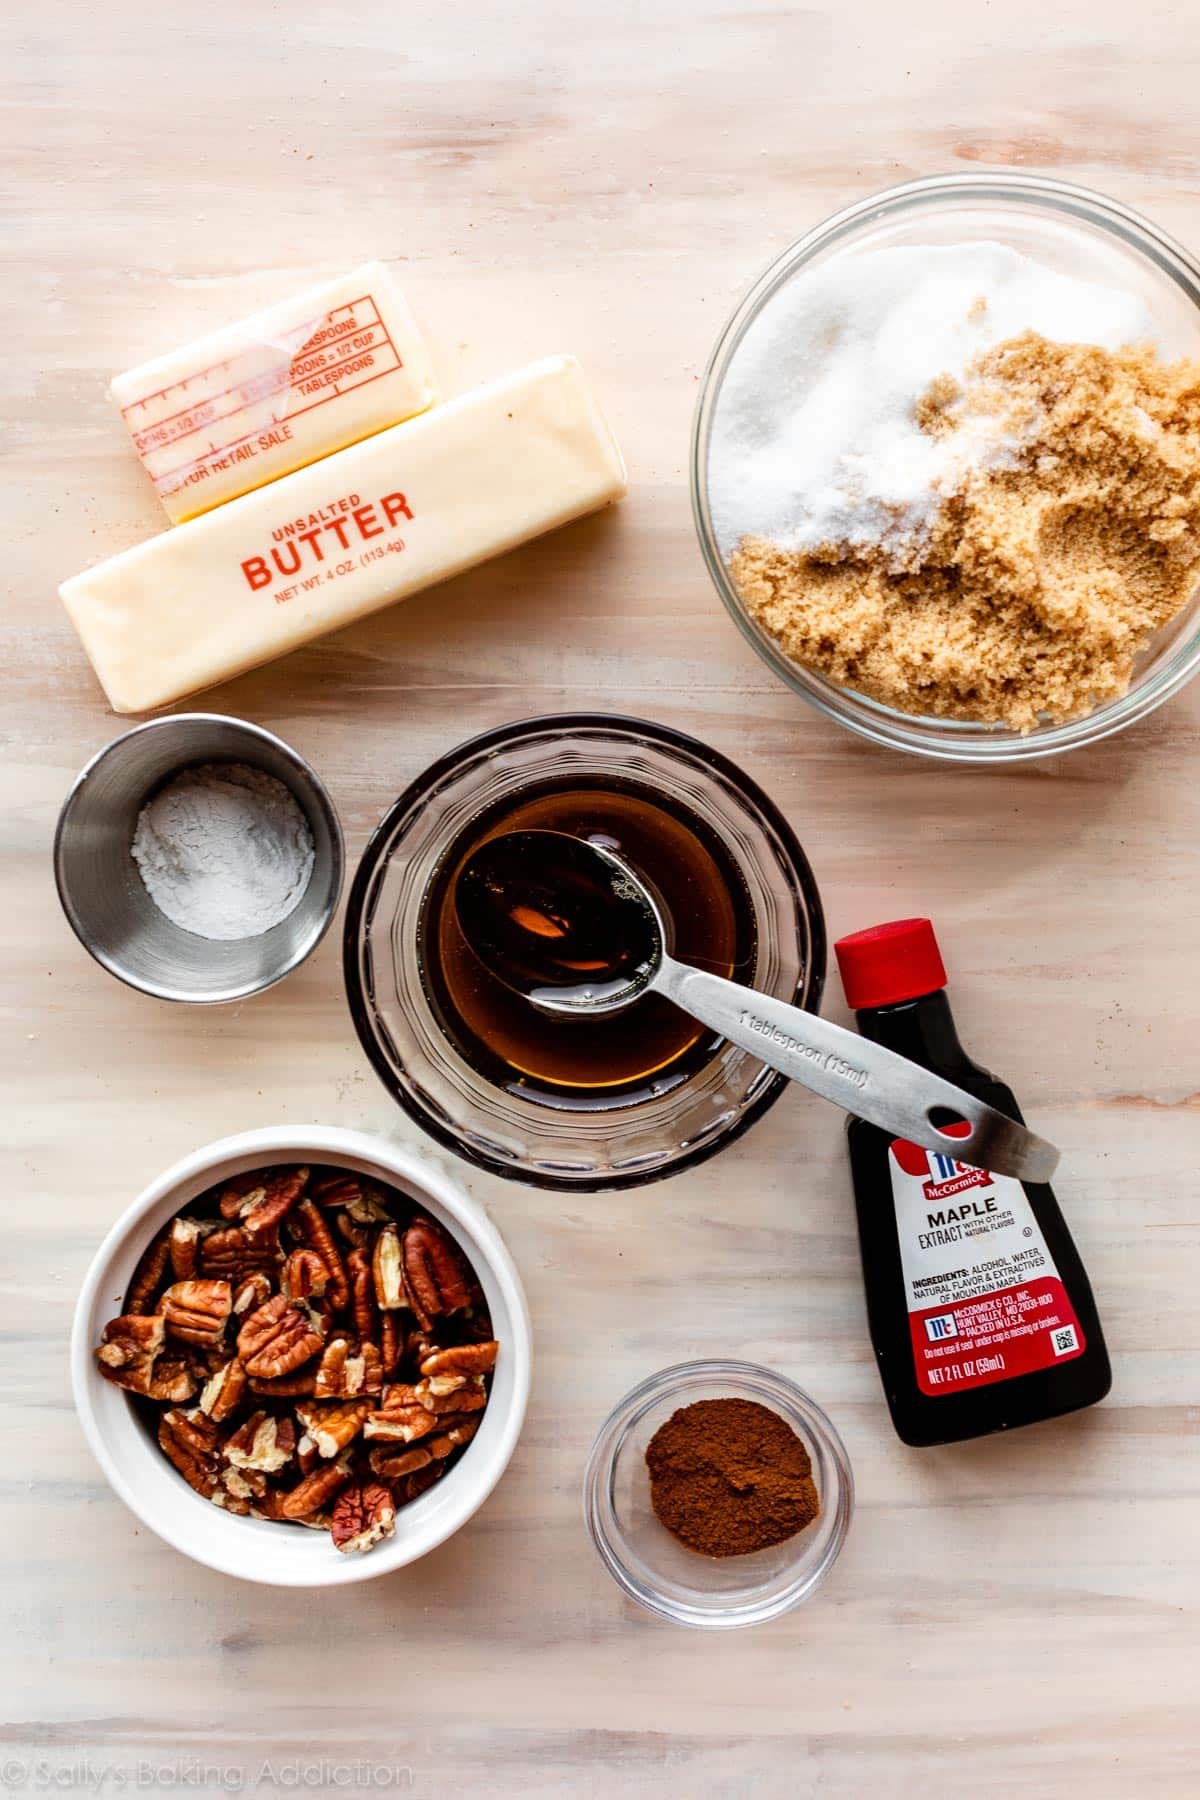 maple syrup, maple extract, pecans, butter, and other ingredients required